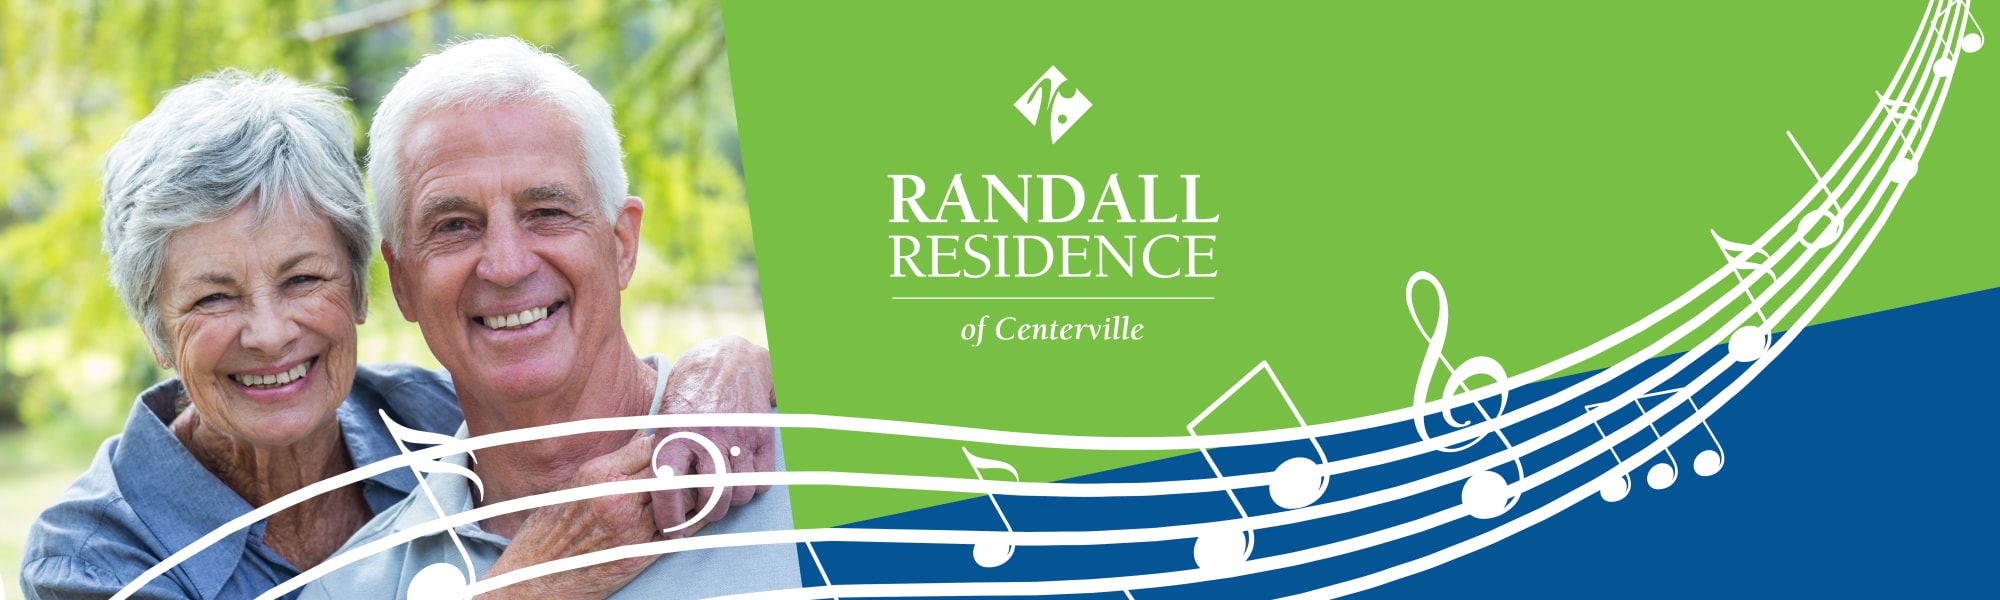 Events at Randall Residence of Centerville in Centerville, Ohio